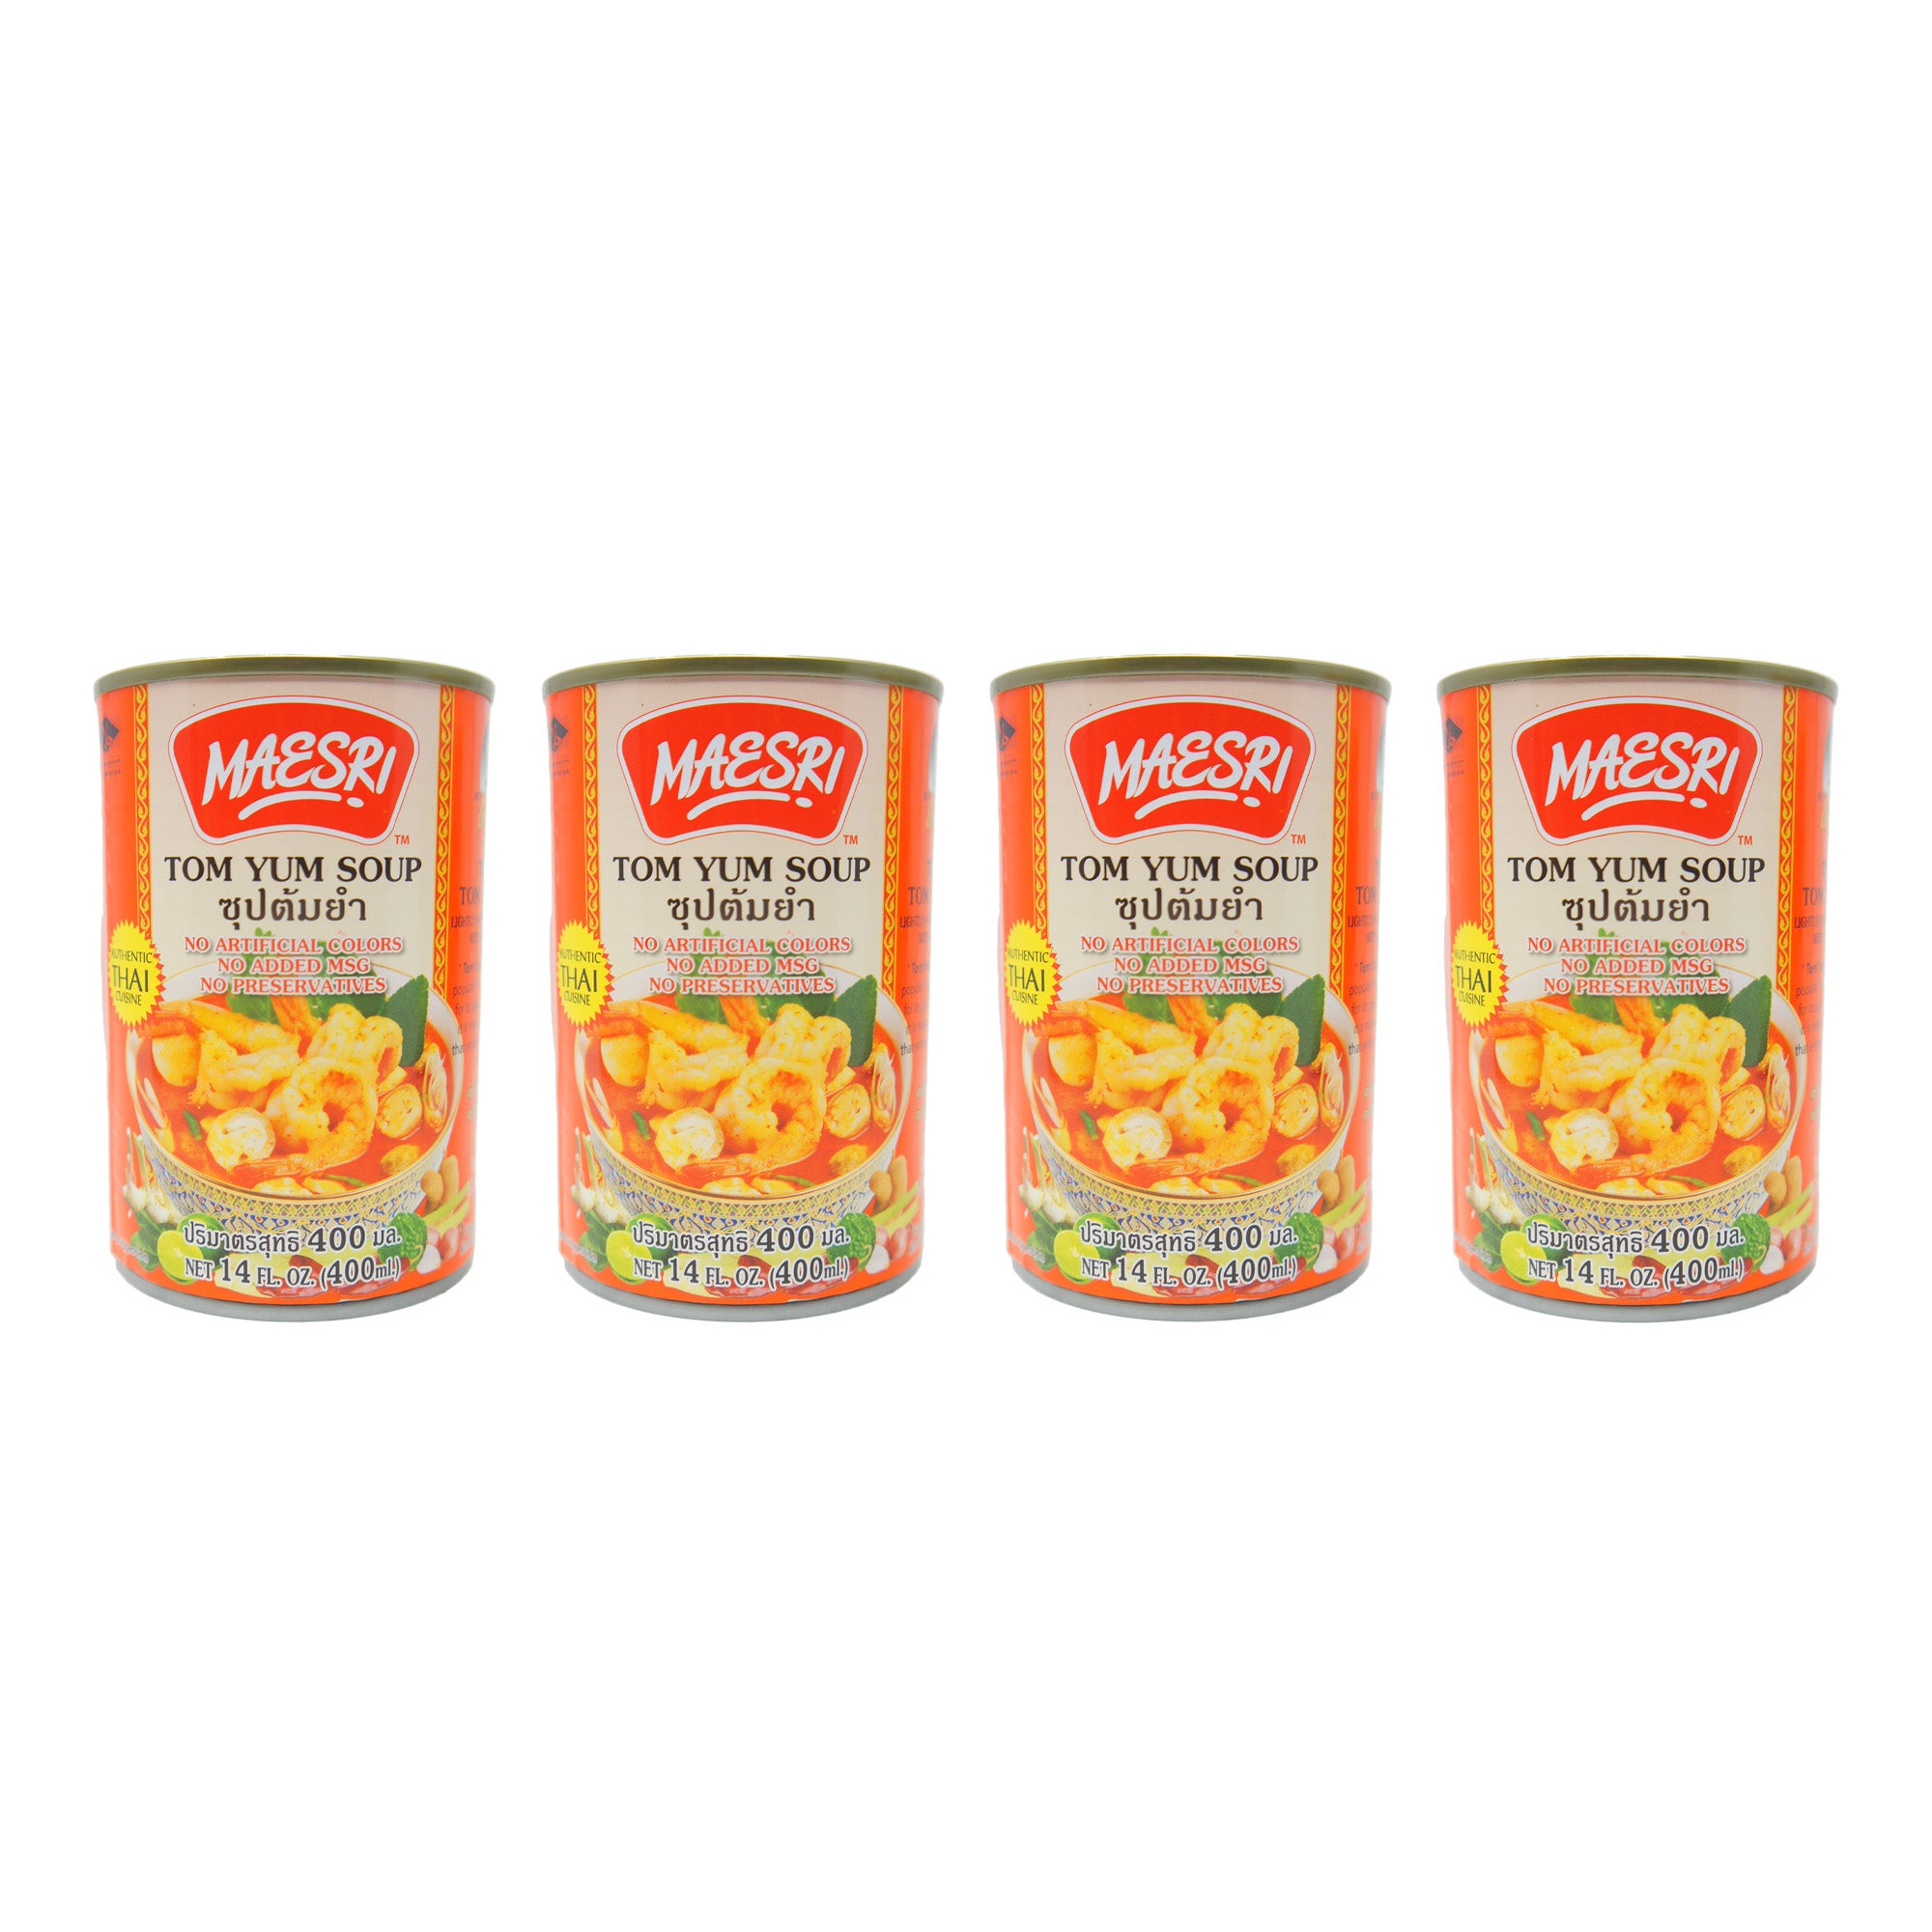 Maesri Tom Yum Soup, 14 fl oz Can, Product of Thailand (4 Pack)